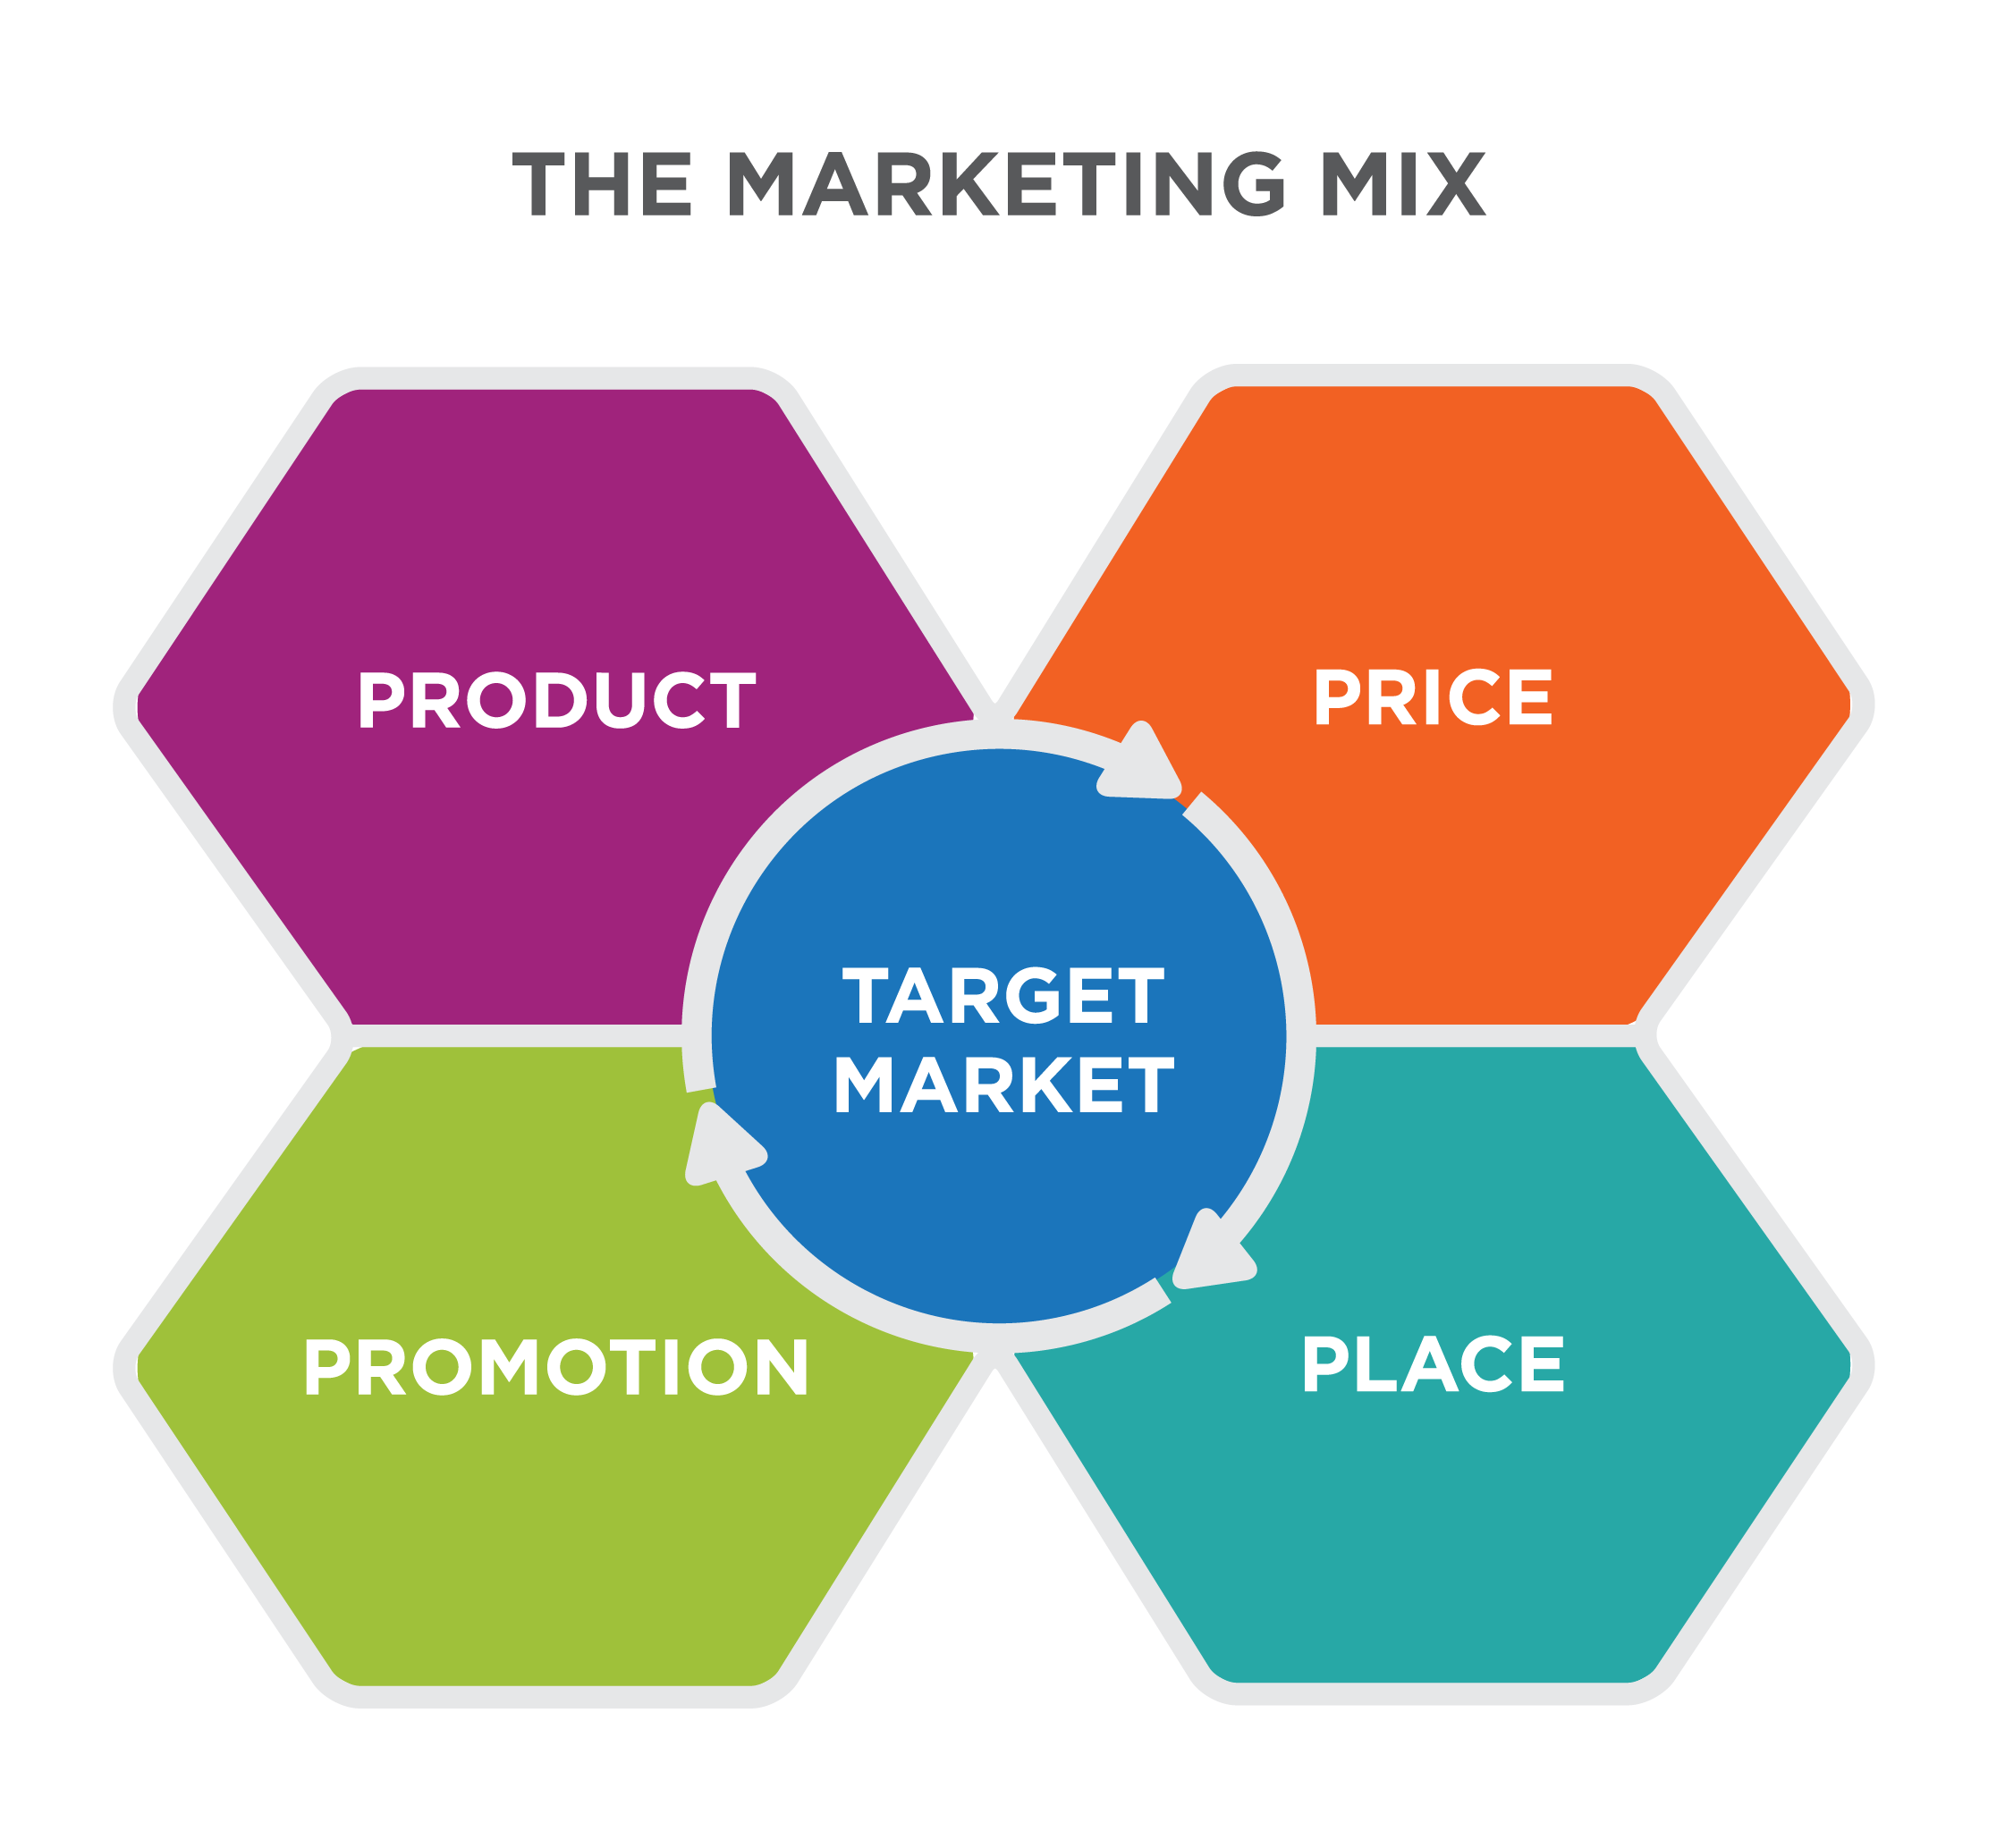 The Marketing Mix. At the center is the target market. Arrows circle around the target market, indicating a cycle between product, price, place, and promotion.